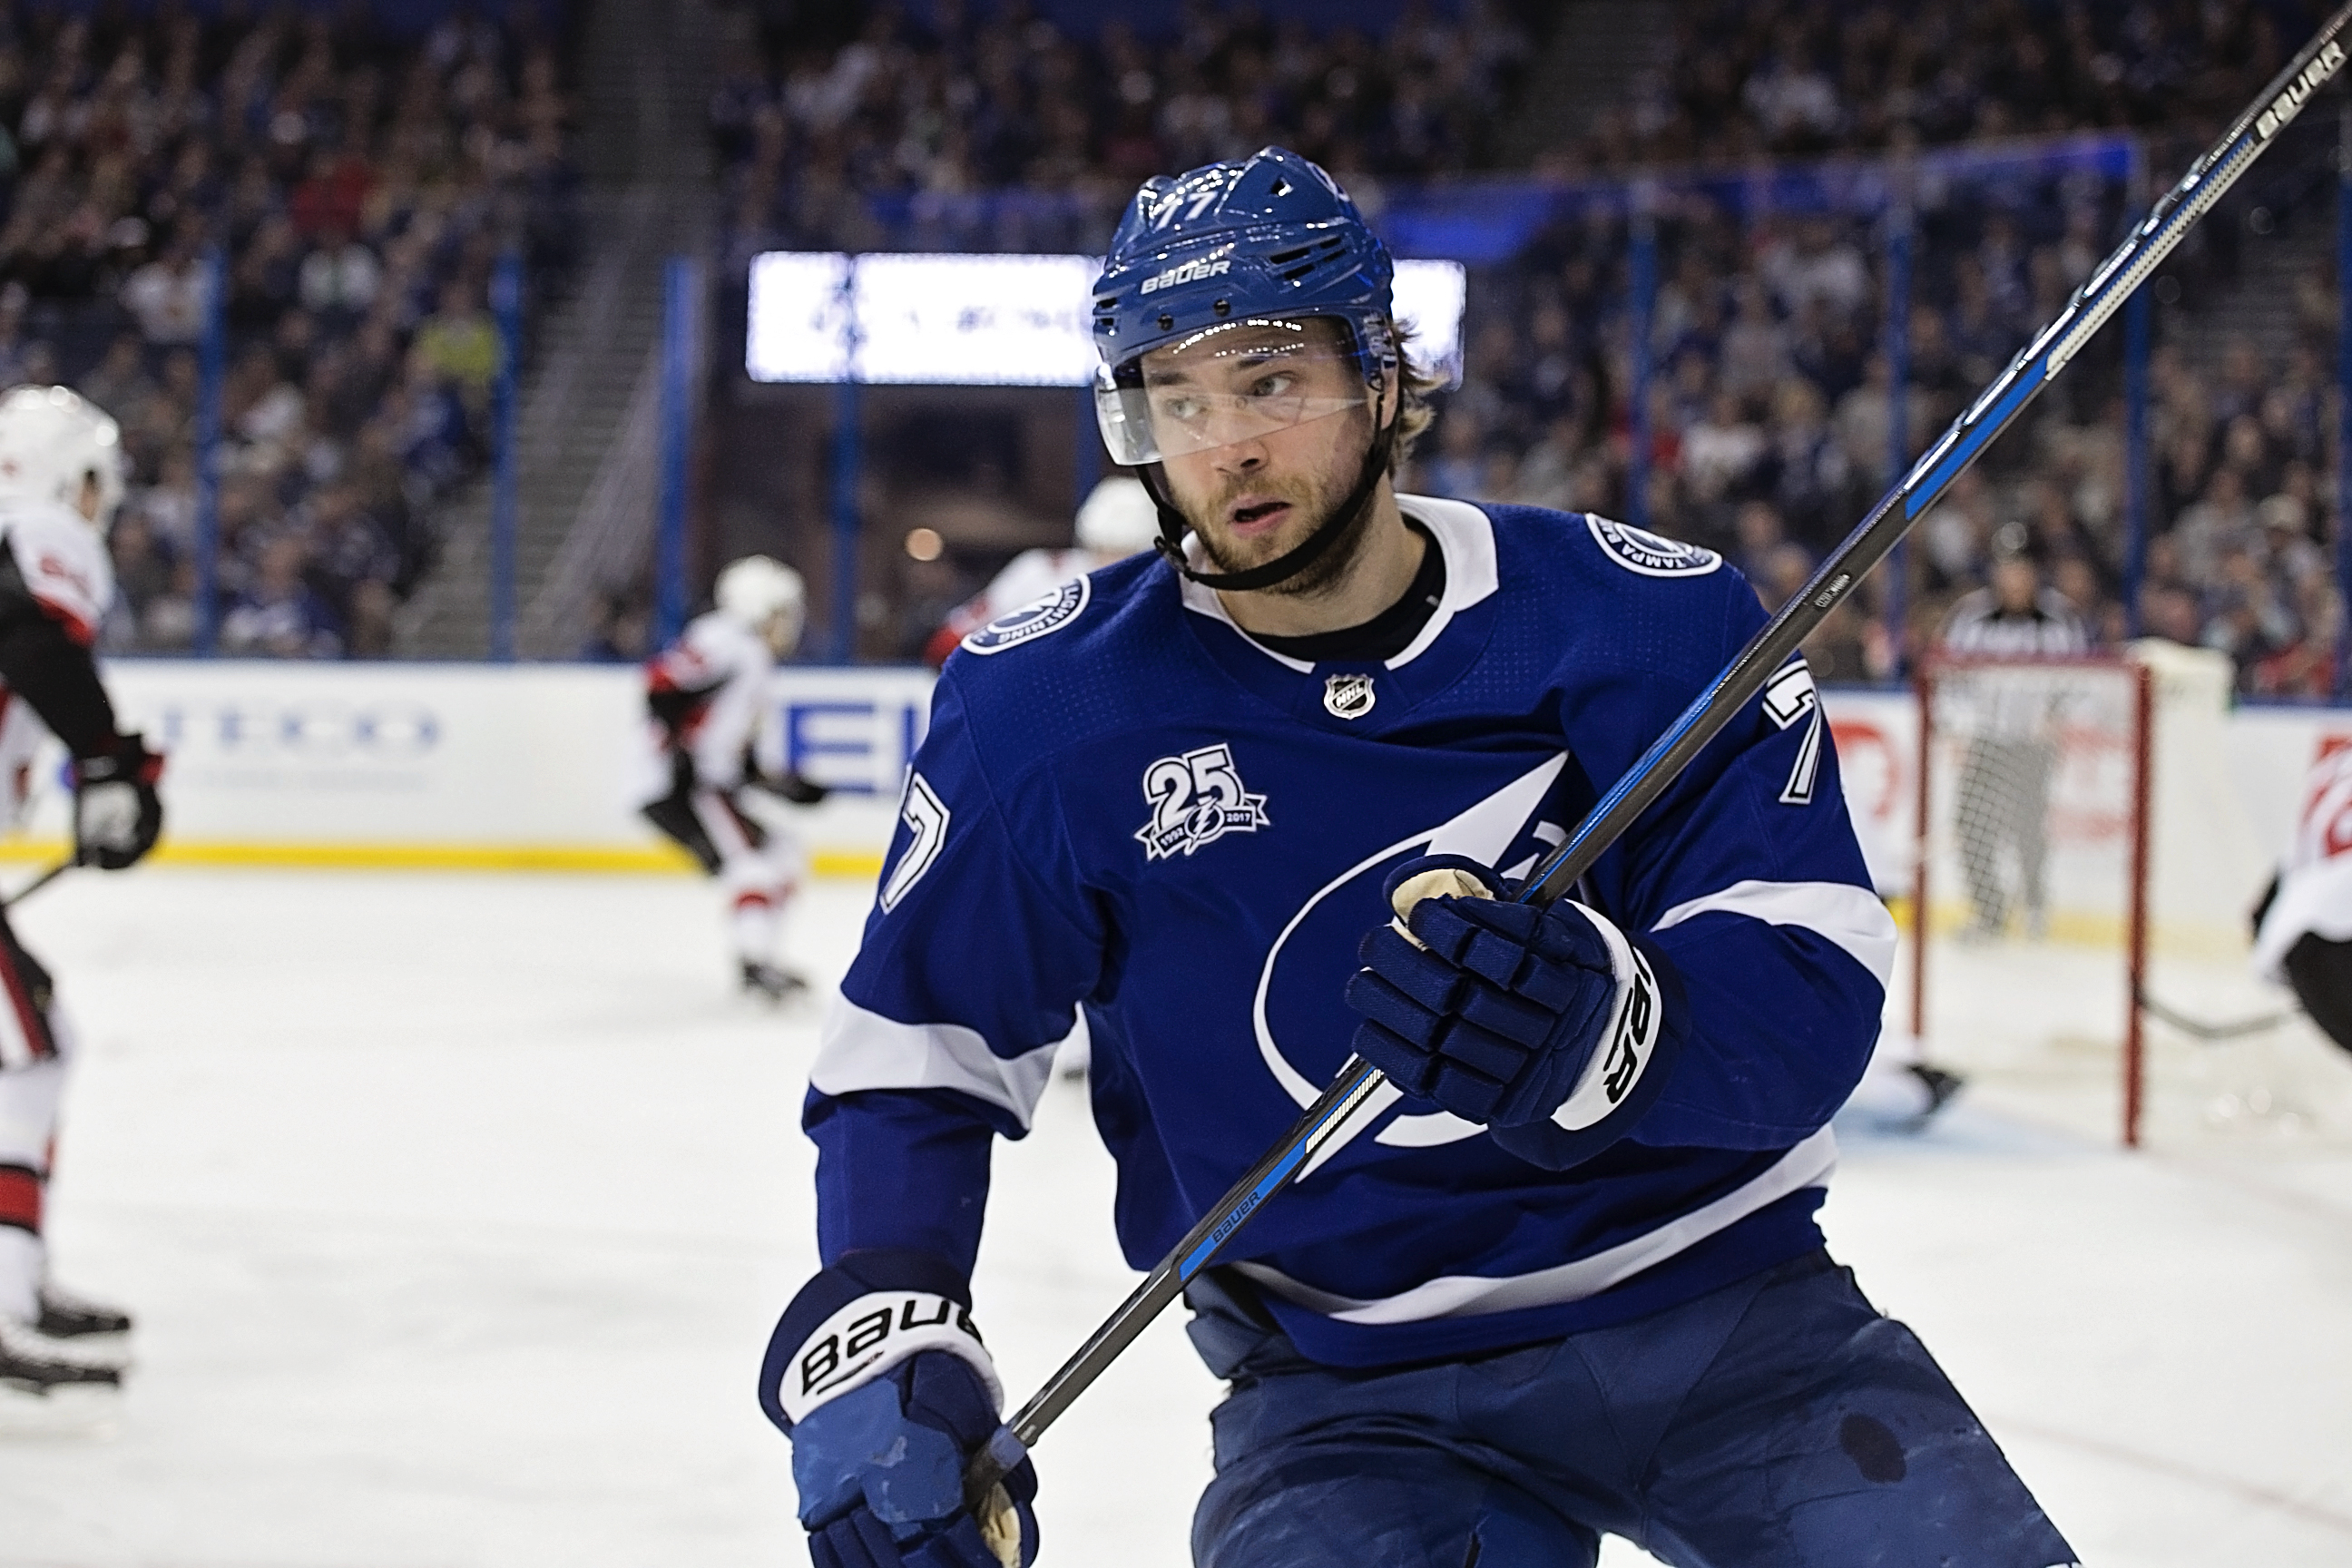 Hedman and the defense have given up far too many goals./CARMEN MANDATO